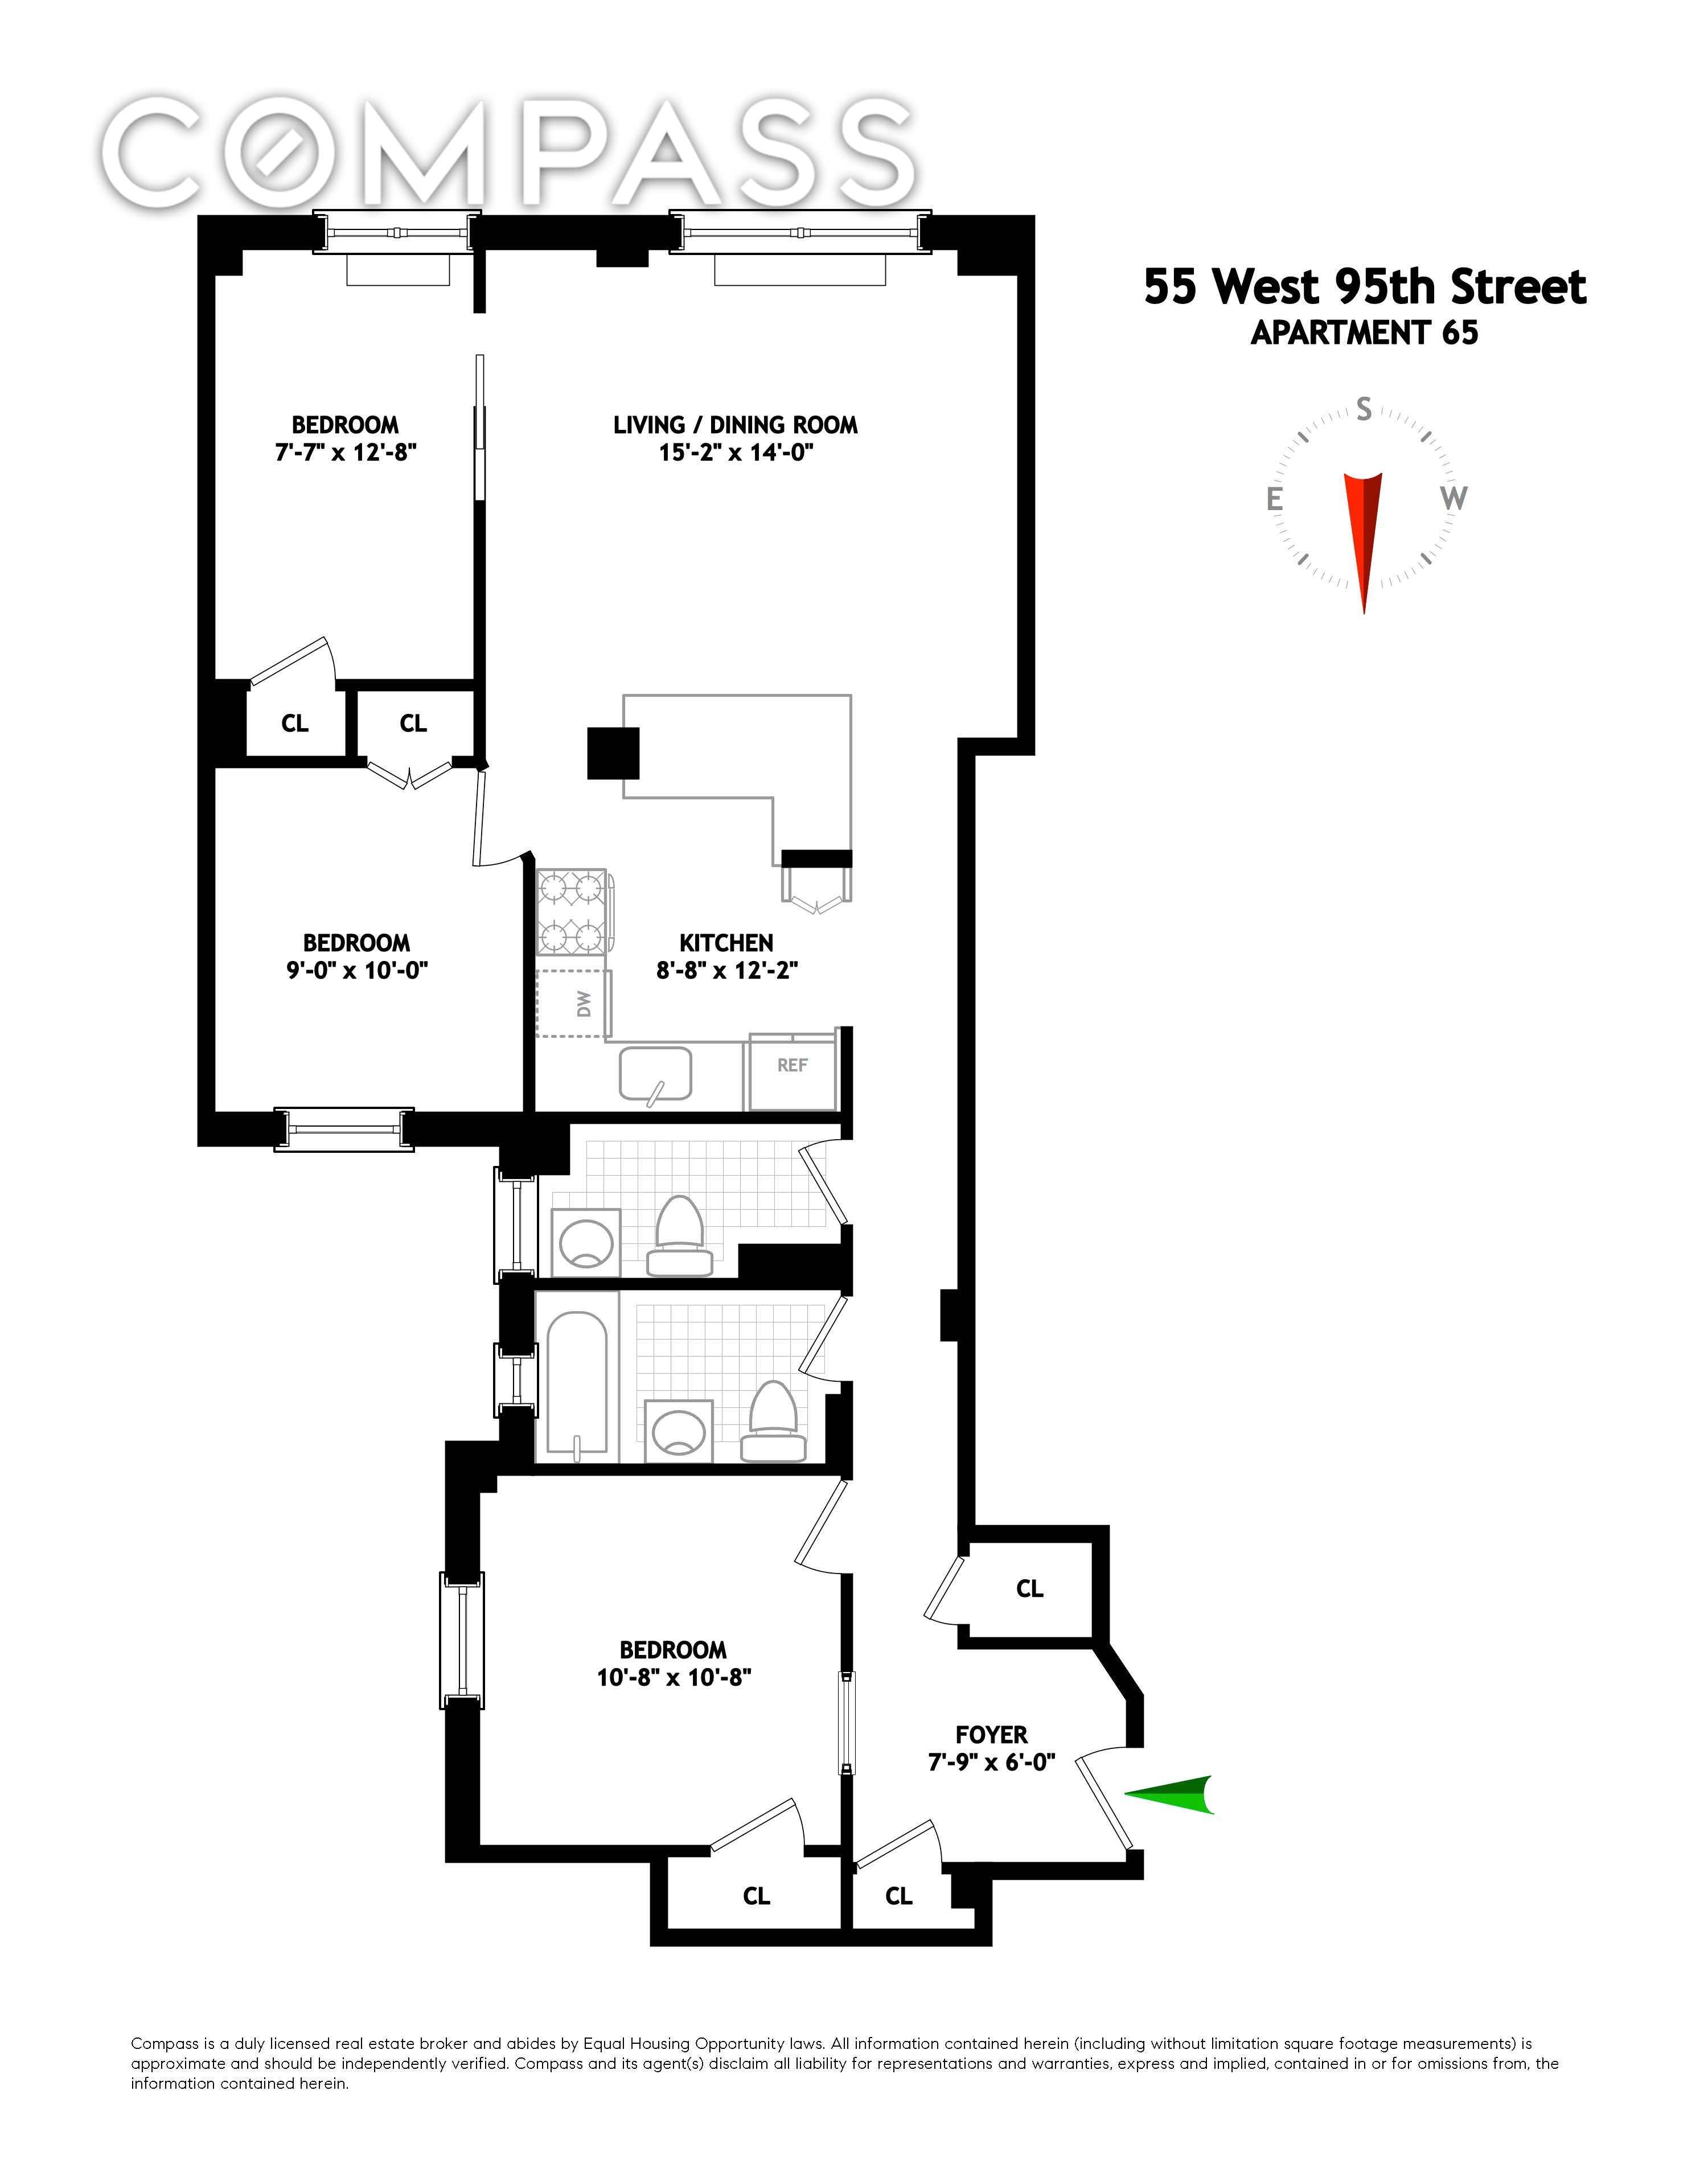 55 West 95th Street 65 Upper West Side New York NY 10025